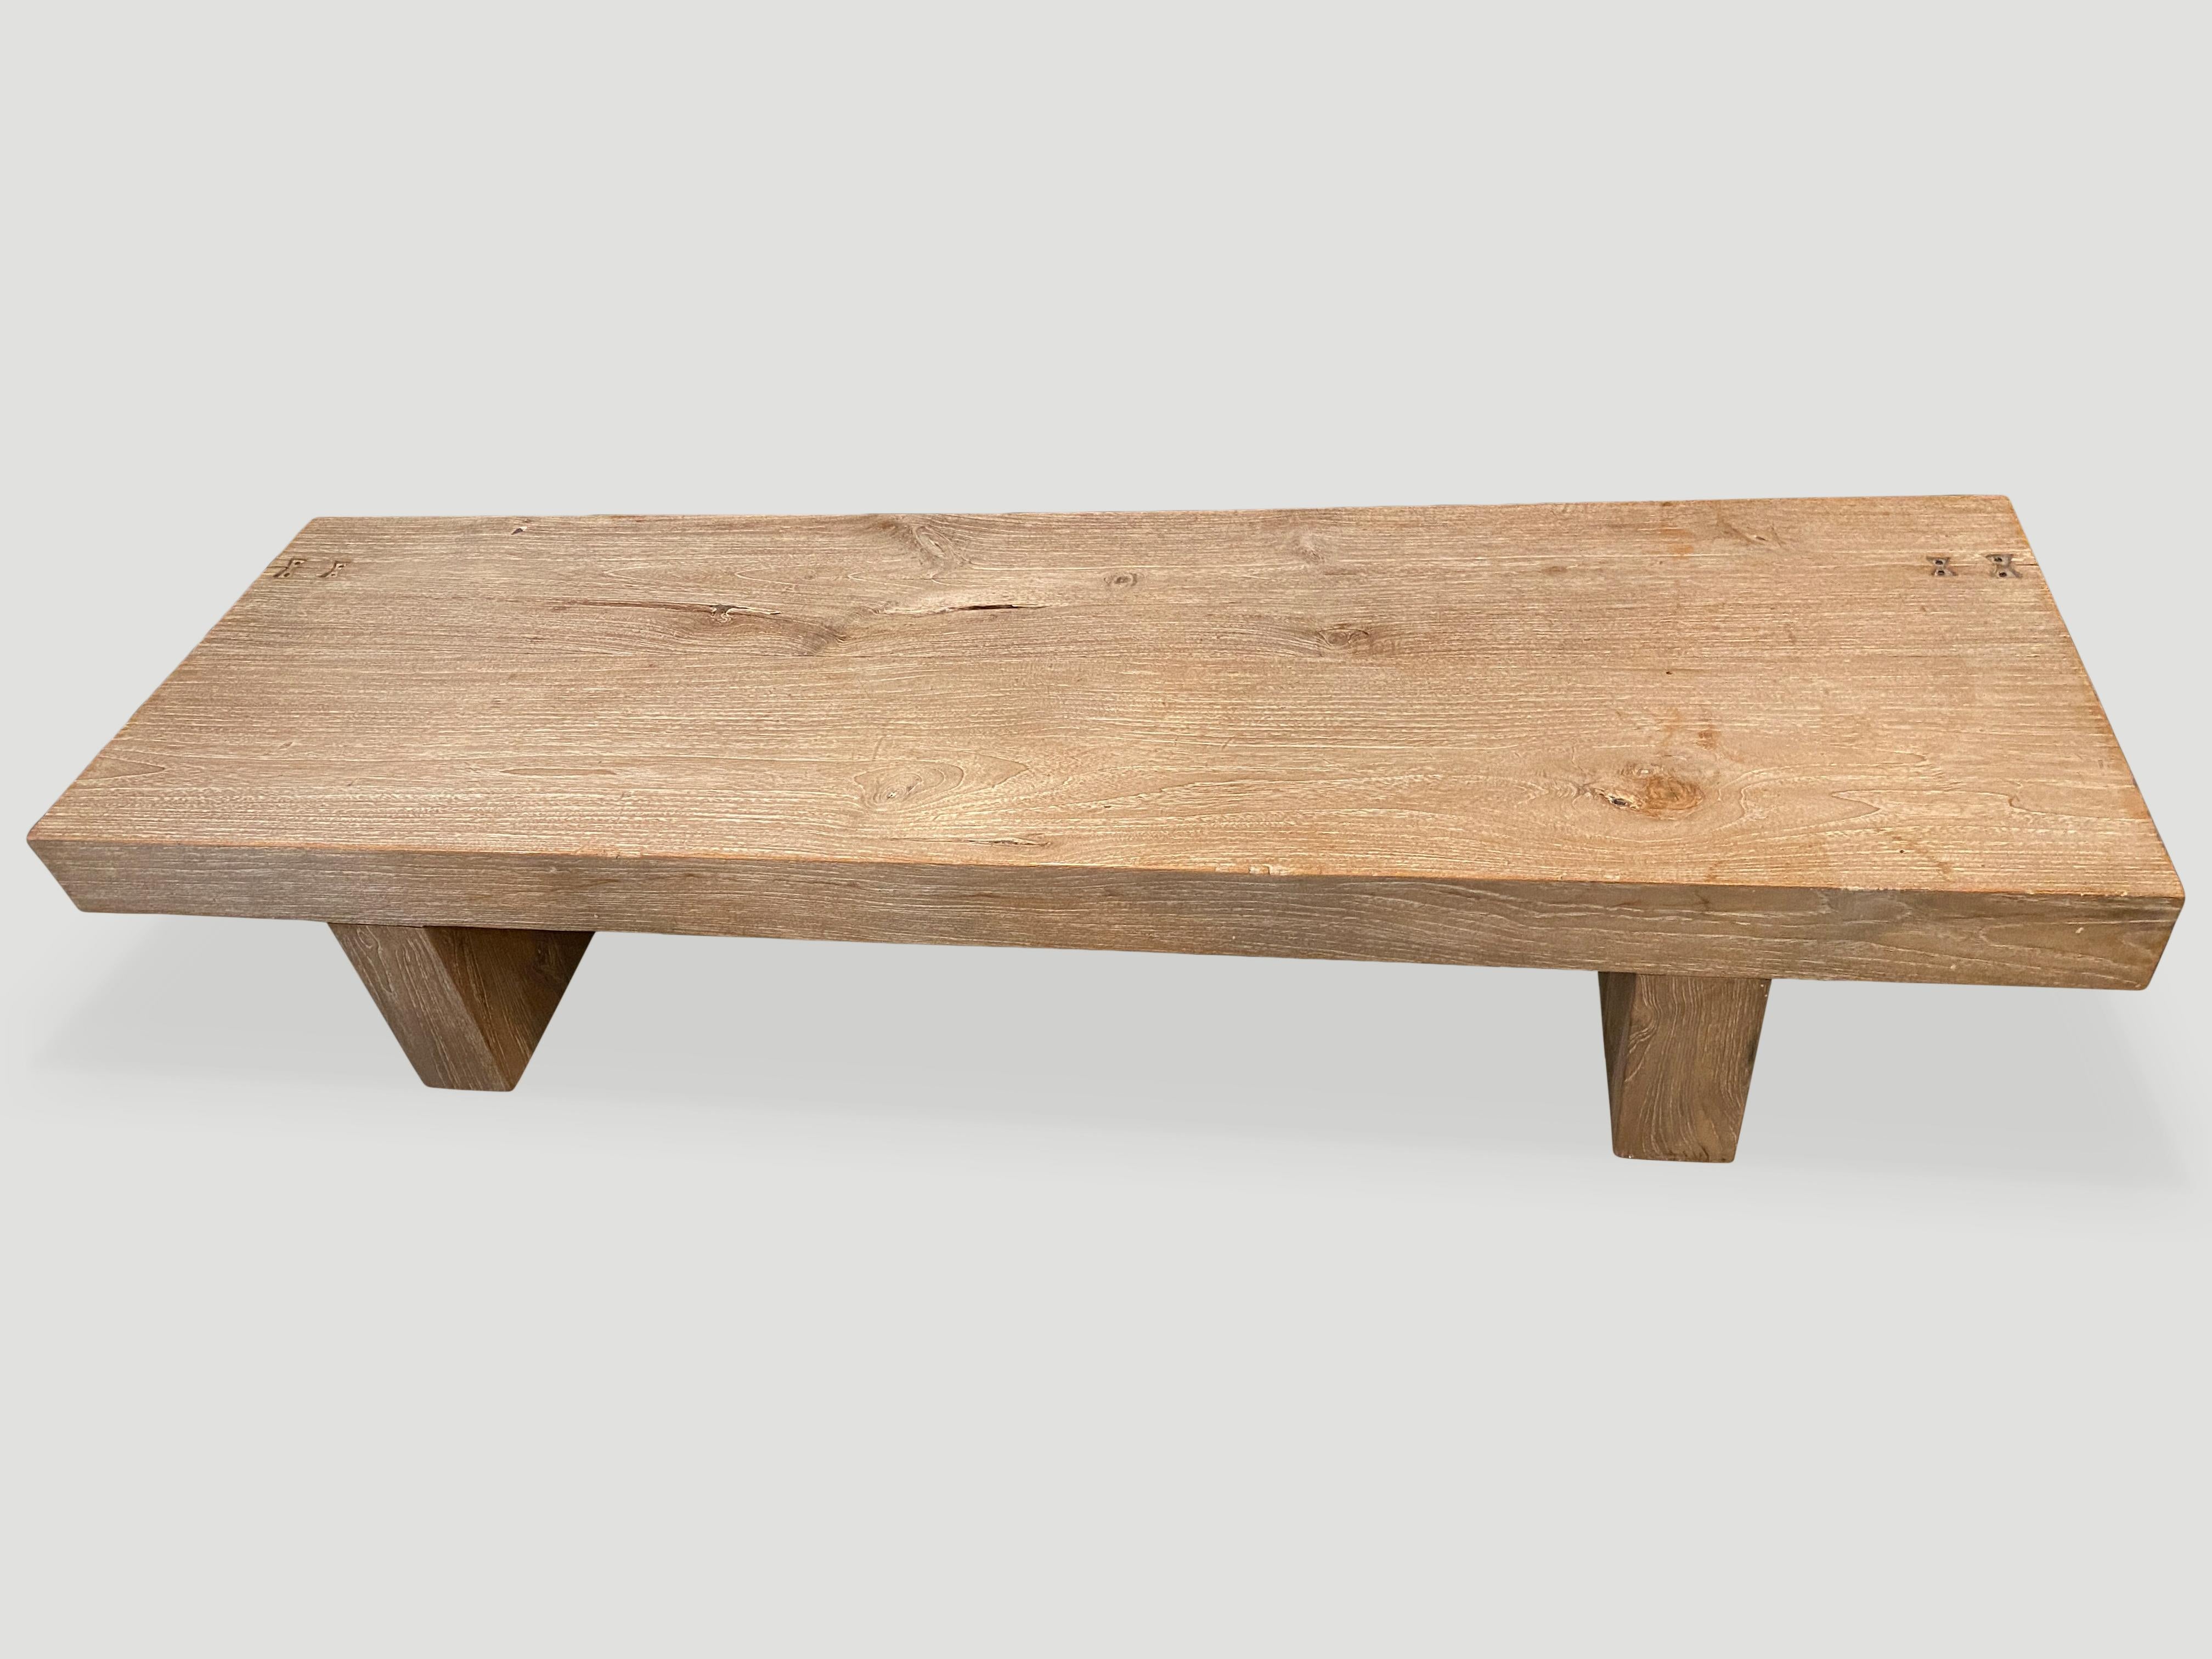 Beautiful reclaimed teak wood coffee table or bench with a light ceruse finish. We added butterfly details into the five inch thick hand carved slabs which are joined together. Shown with minimalist legs.

Own an Andrianna Shamaris